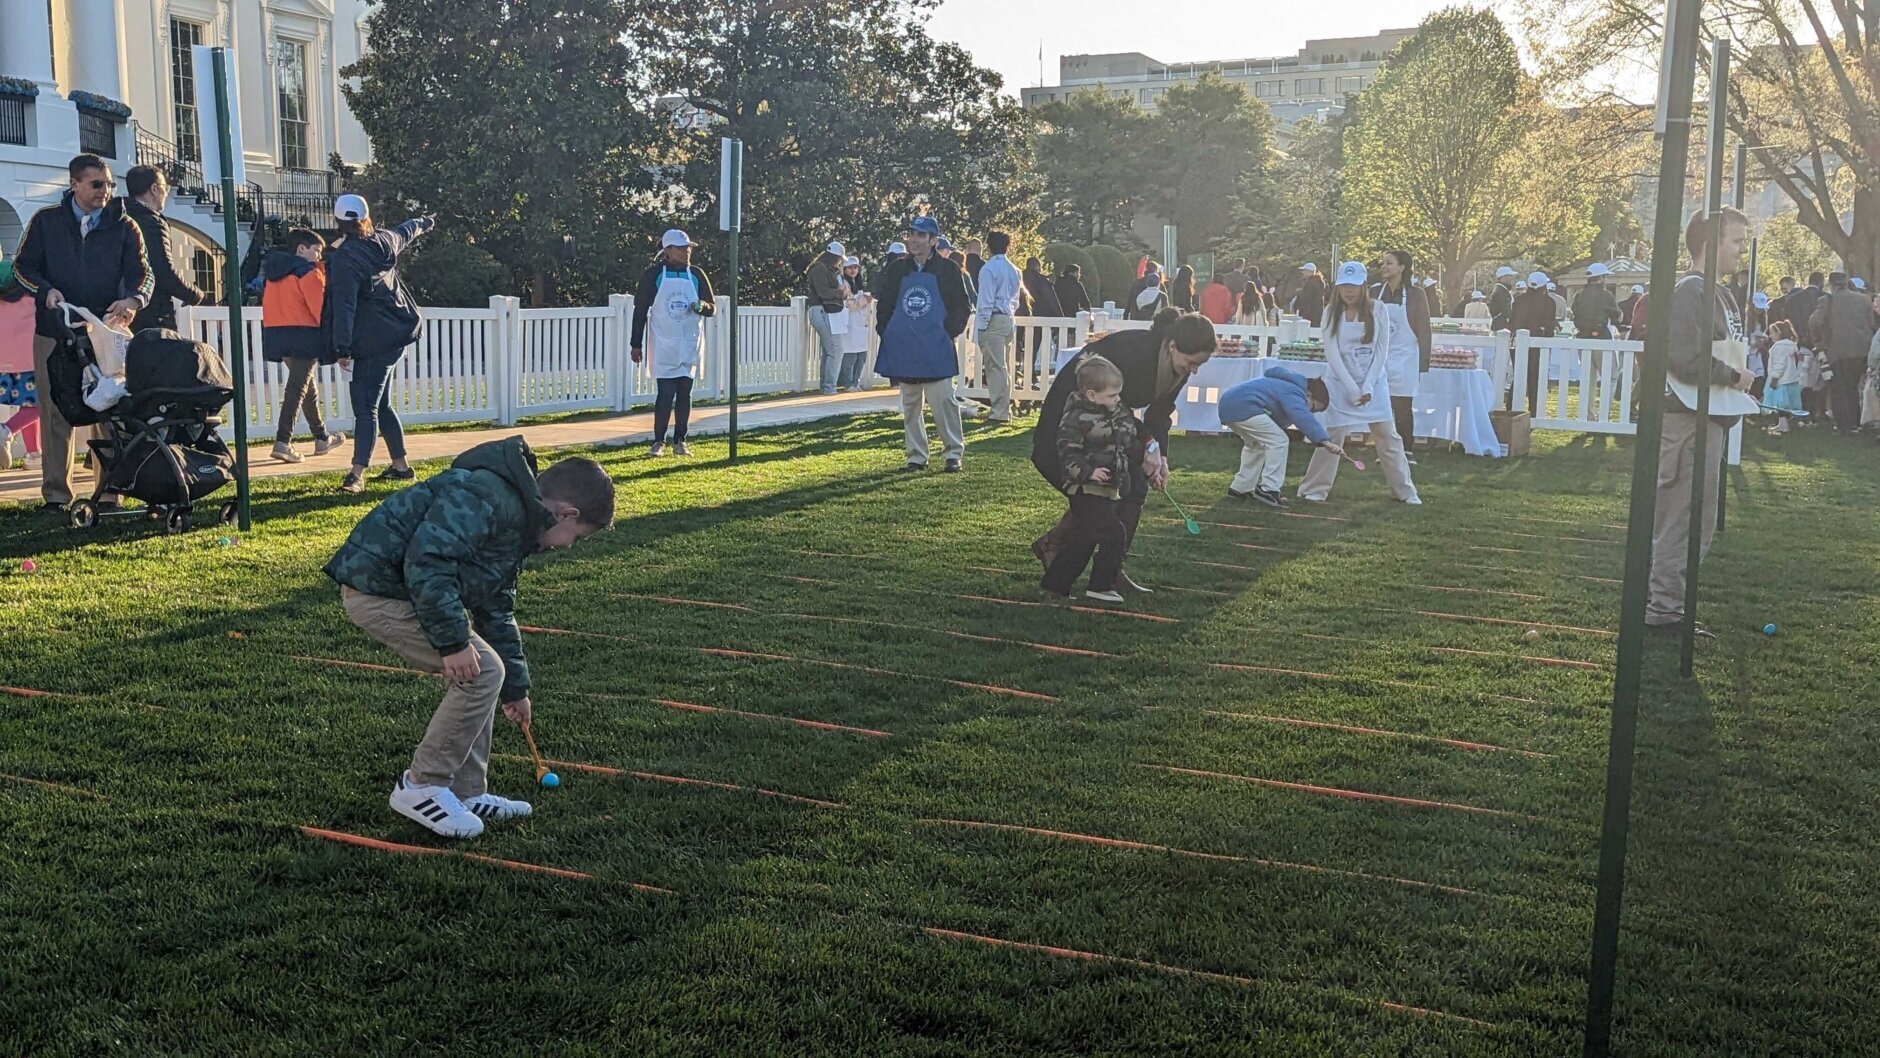 <p>The White House South Lawn had its traditional event of rolling eggs down the track with a wooden spoon but Monday also included more contemporary features like a school house with educational activities and special guests such as Sesame Street Elmo.</p>
